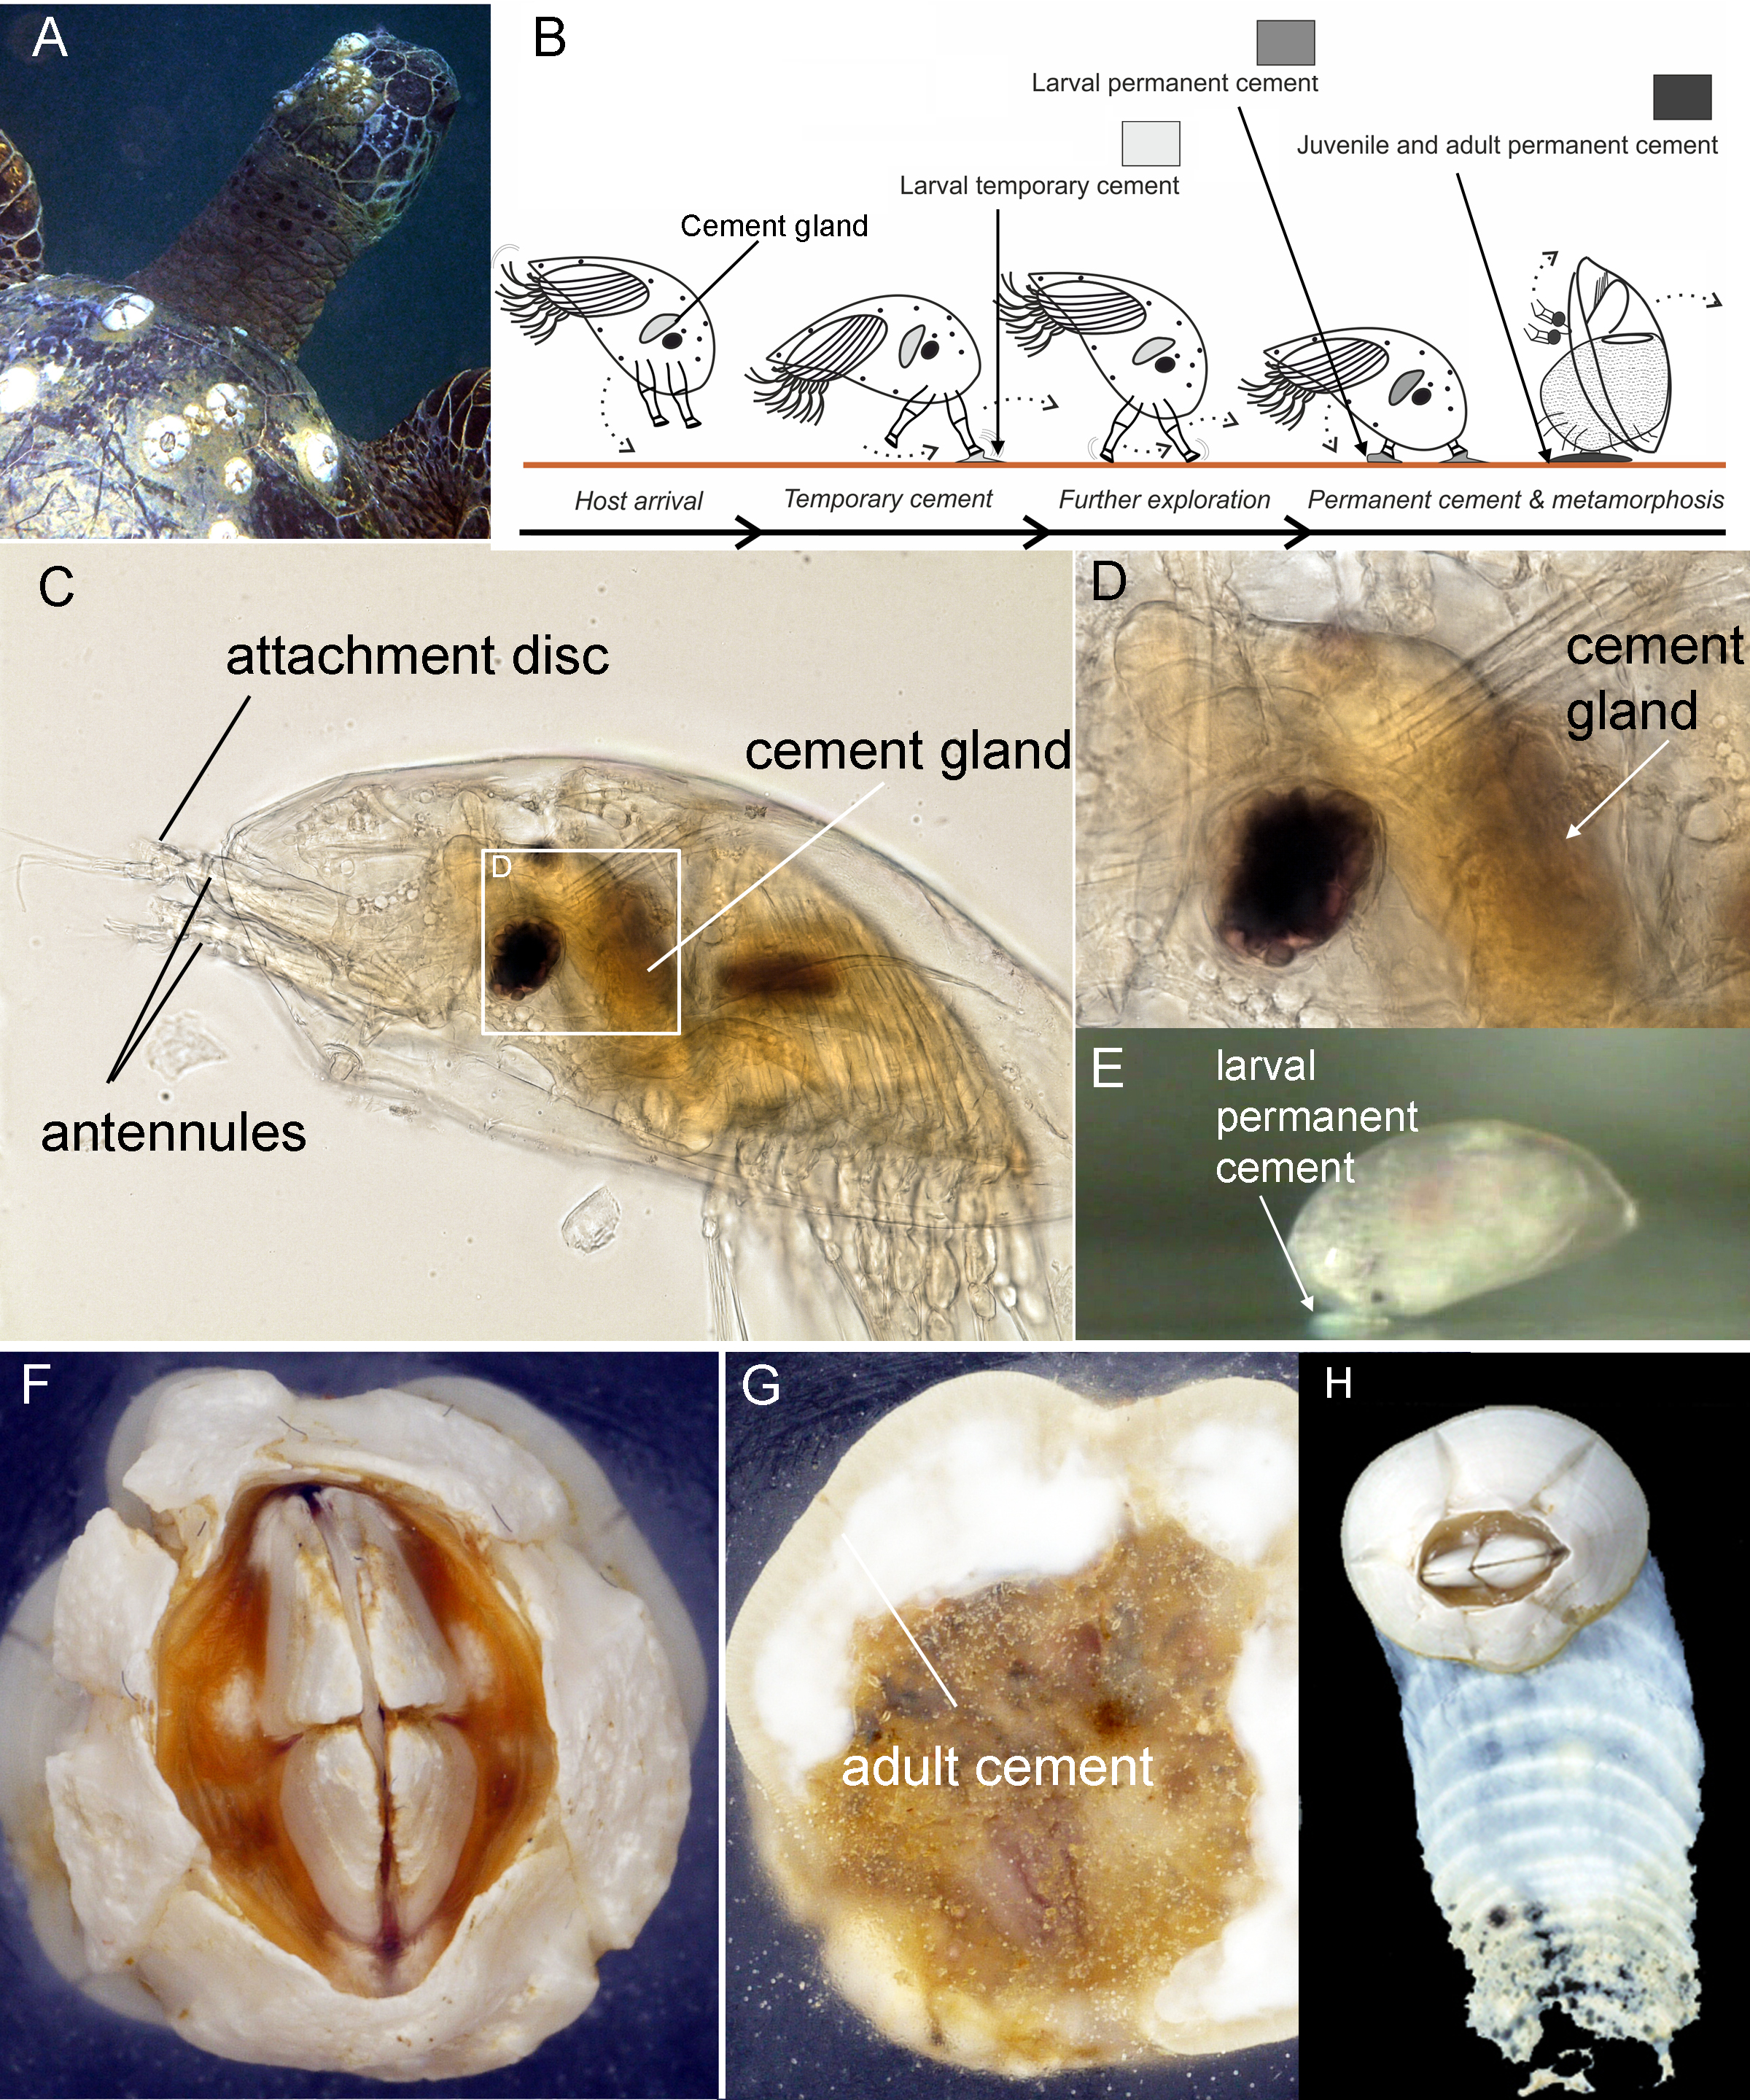 Gene co-option, duplication and divergence of cement proteins underpin the evolution of bioadhesives across barnacle life histories